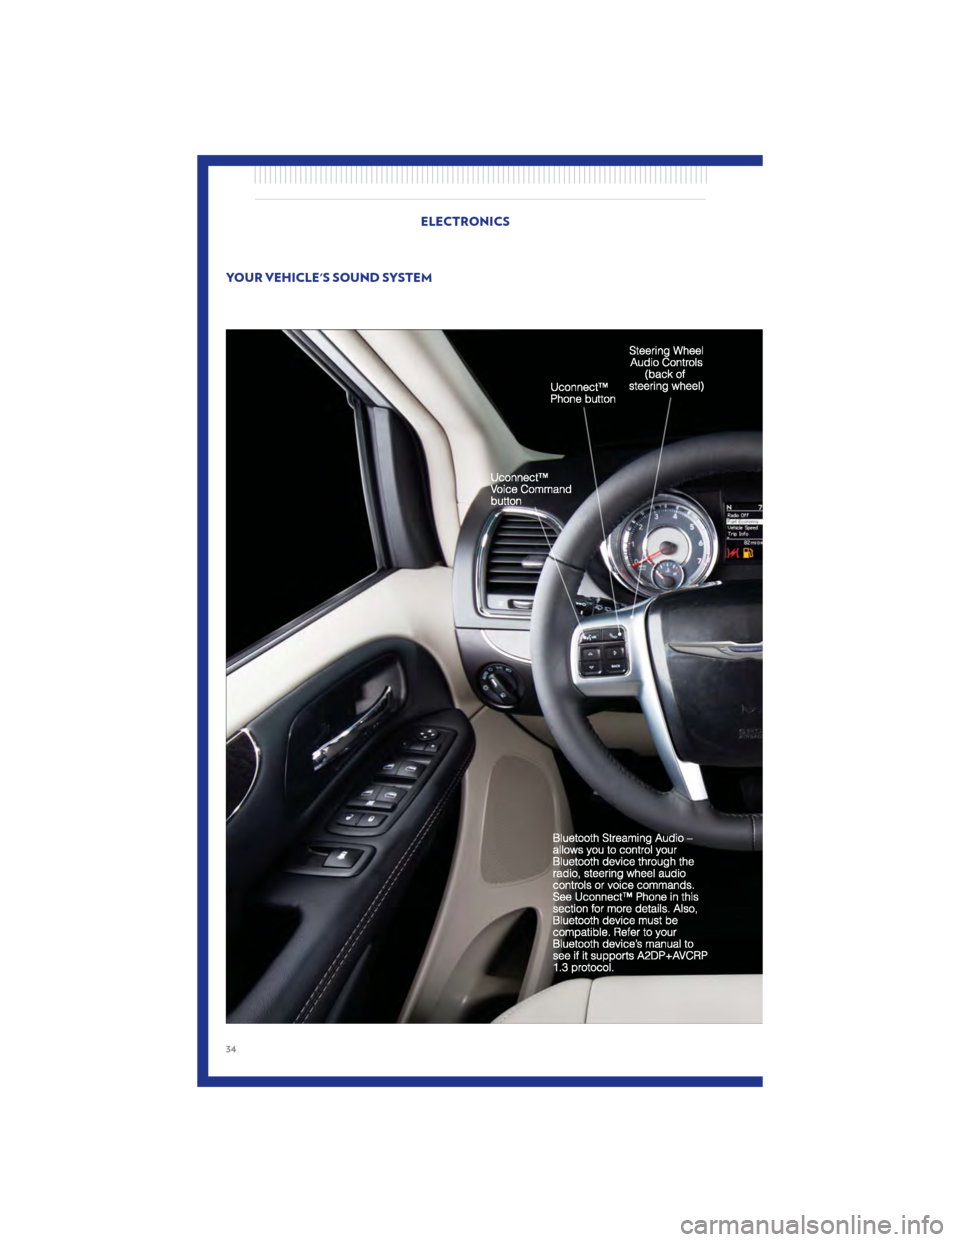 CHRYSLER TOWN AND COUNTRY 2011 5.G Owners Guide YOUR VEHICLES SOUND SYSTEM
ELECTRONICS
34 